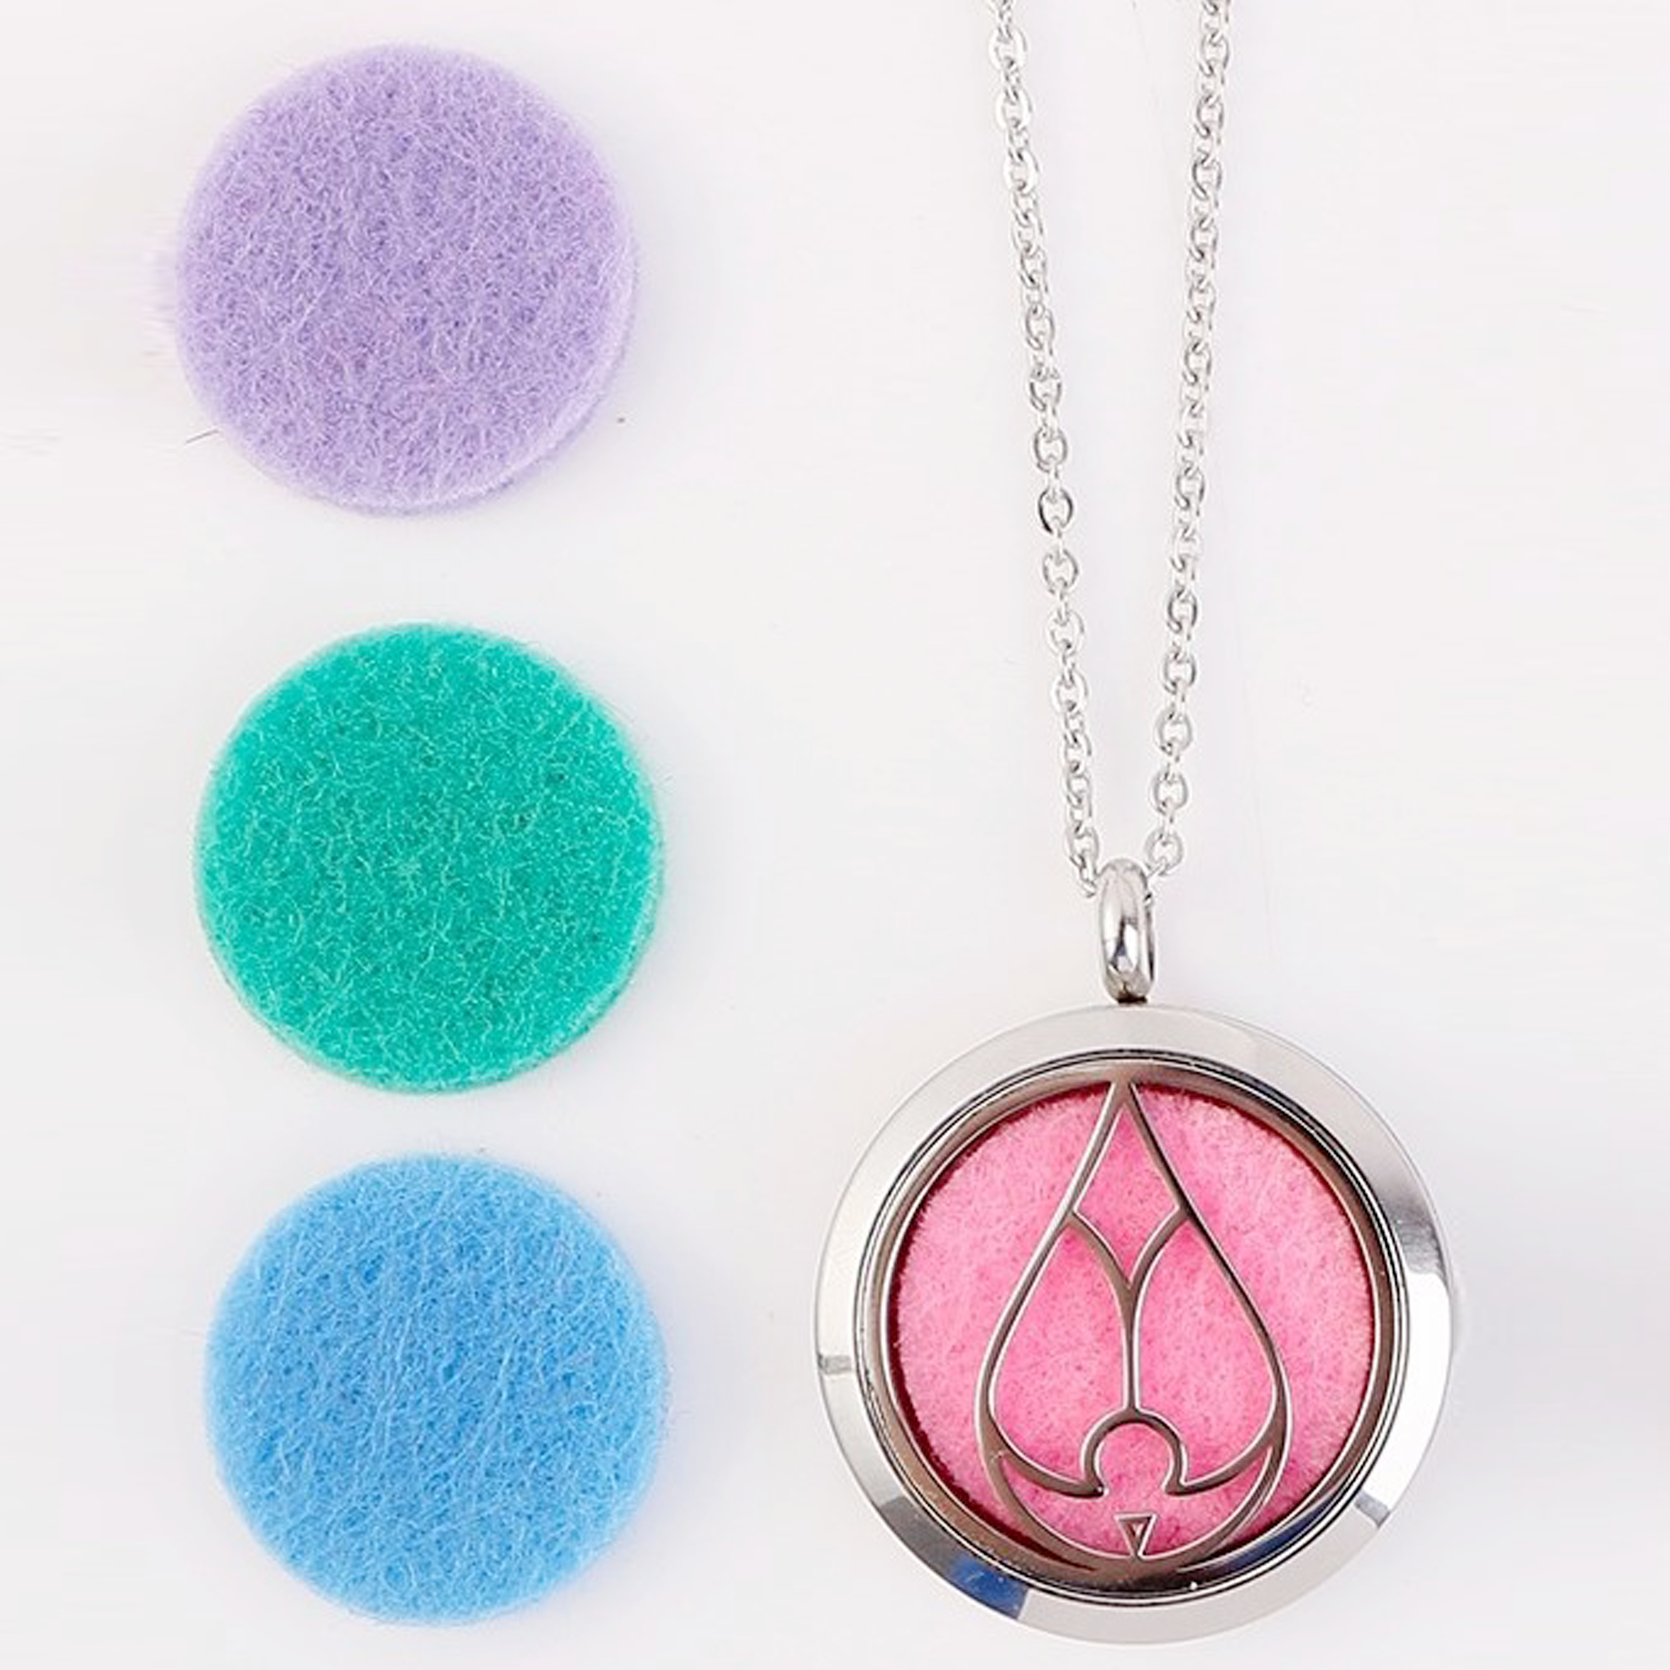 artnaturals Wearable Necklace Essential Oil Diffuser - Unscented - 1ct -  ShopStyle Home Fragrance